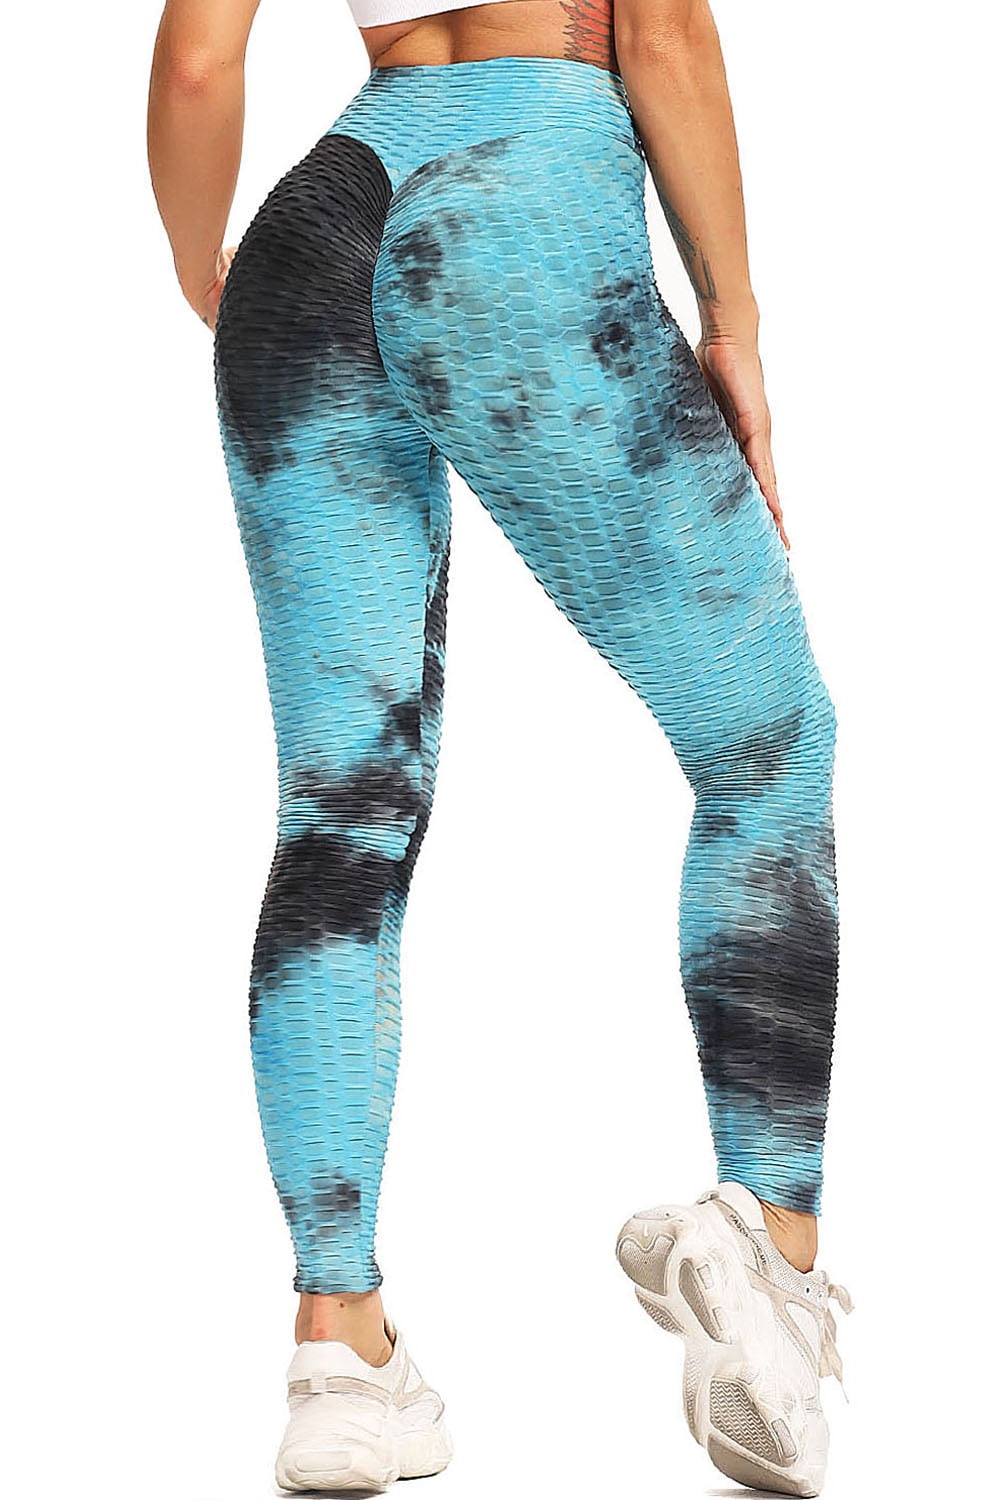 SEASUM Women's Butt Lift Yoga Leggings Tummy Control Tie Dyed Athletic  Pants Textured Workout Running Tights Black+Blue L 